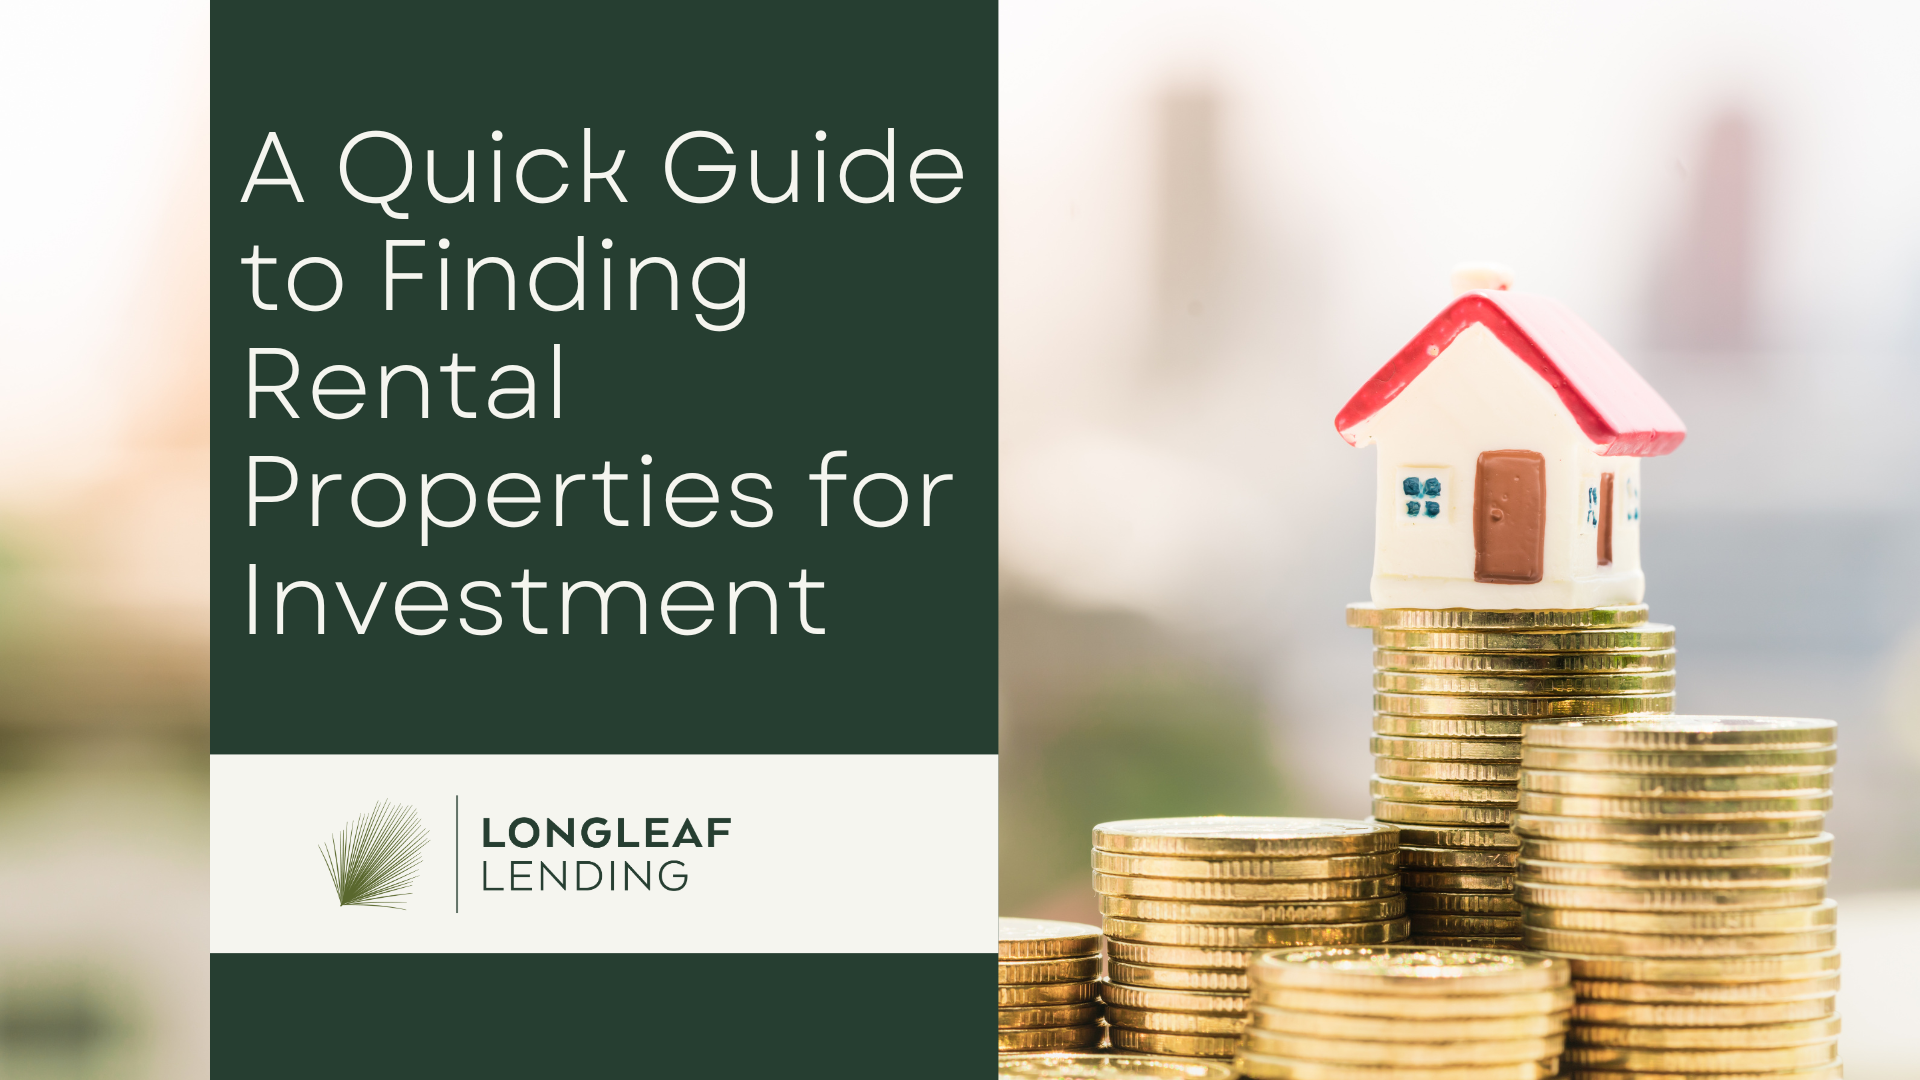 How to Find Rental Properties for Investment: A Quick Guide